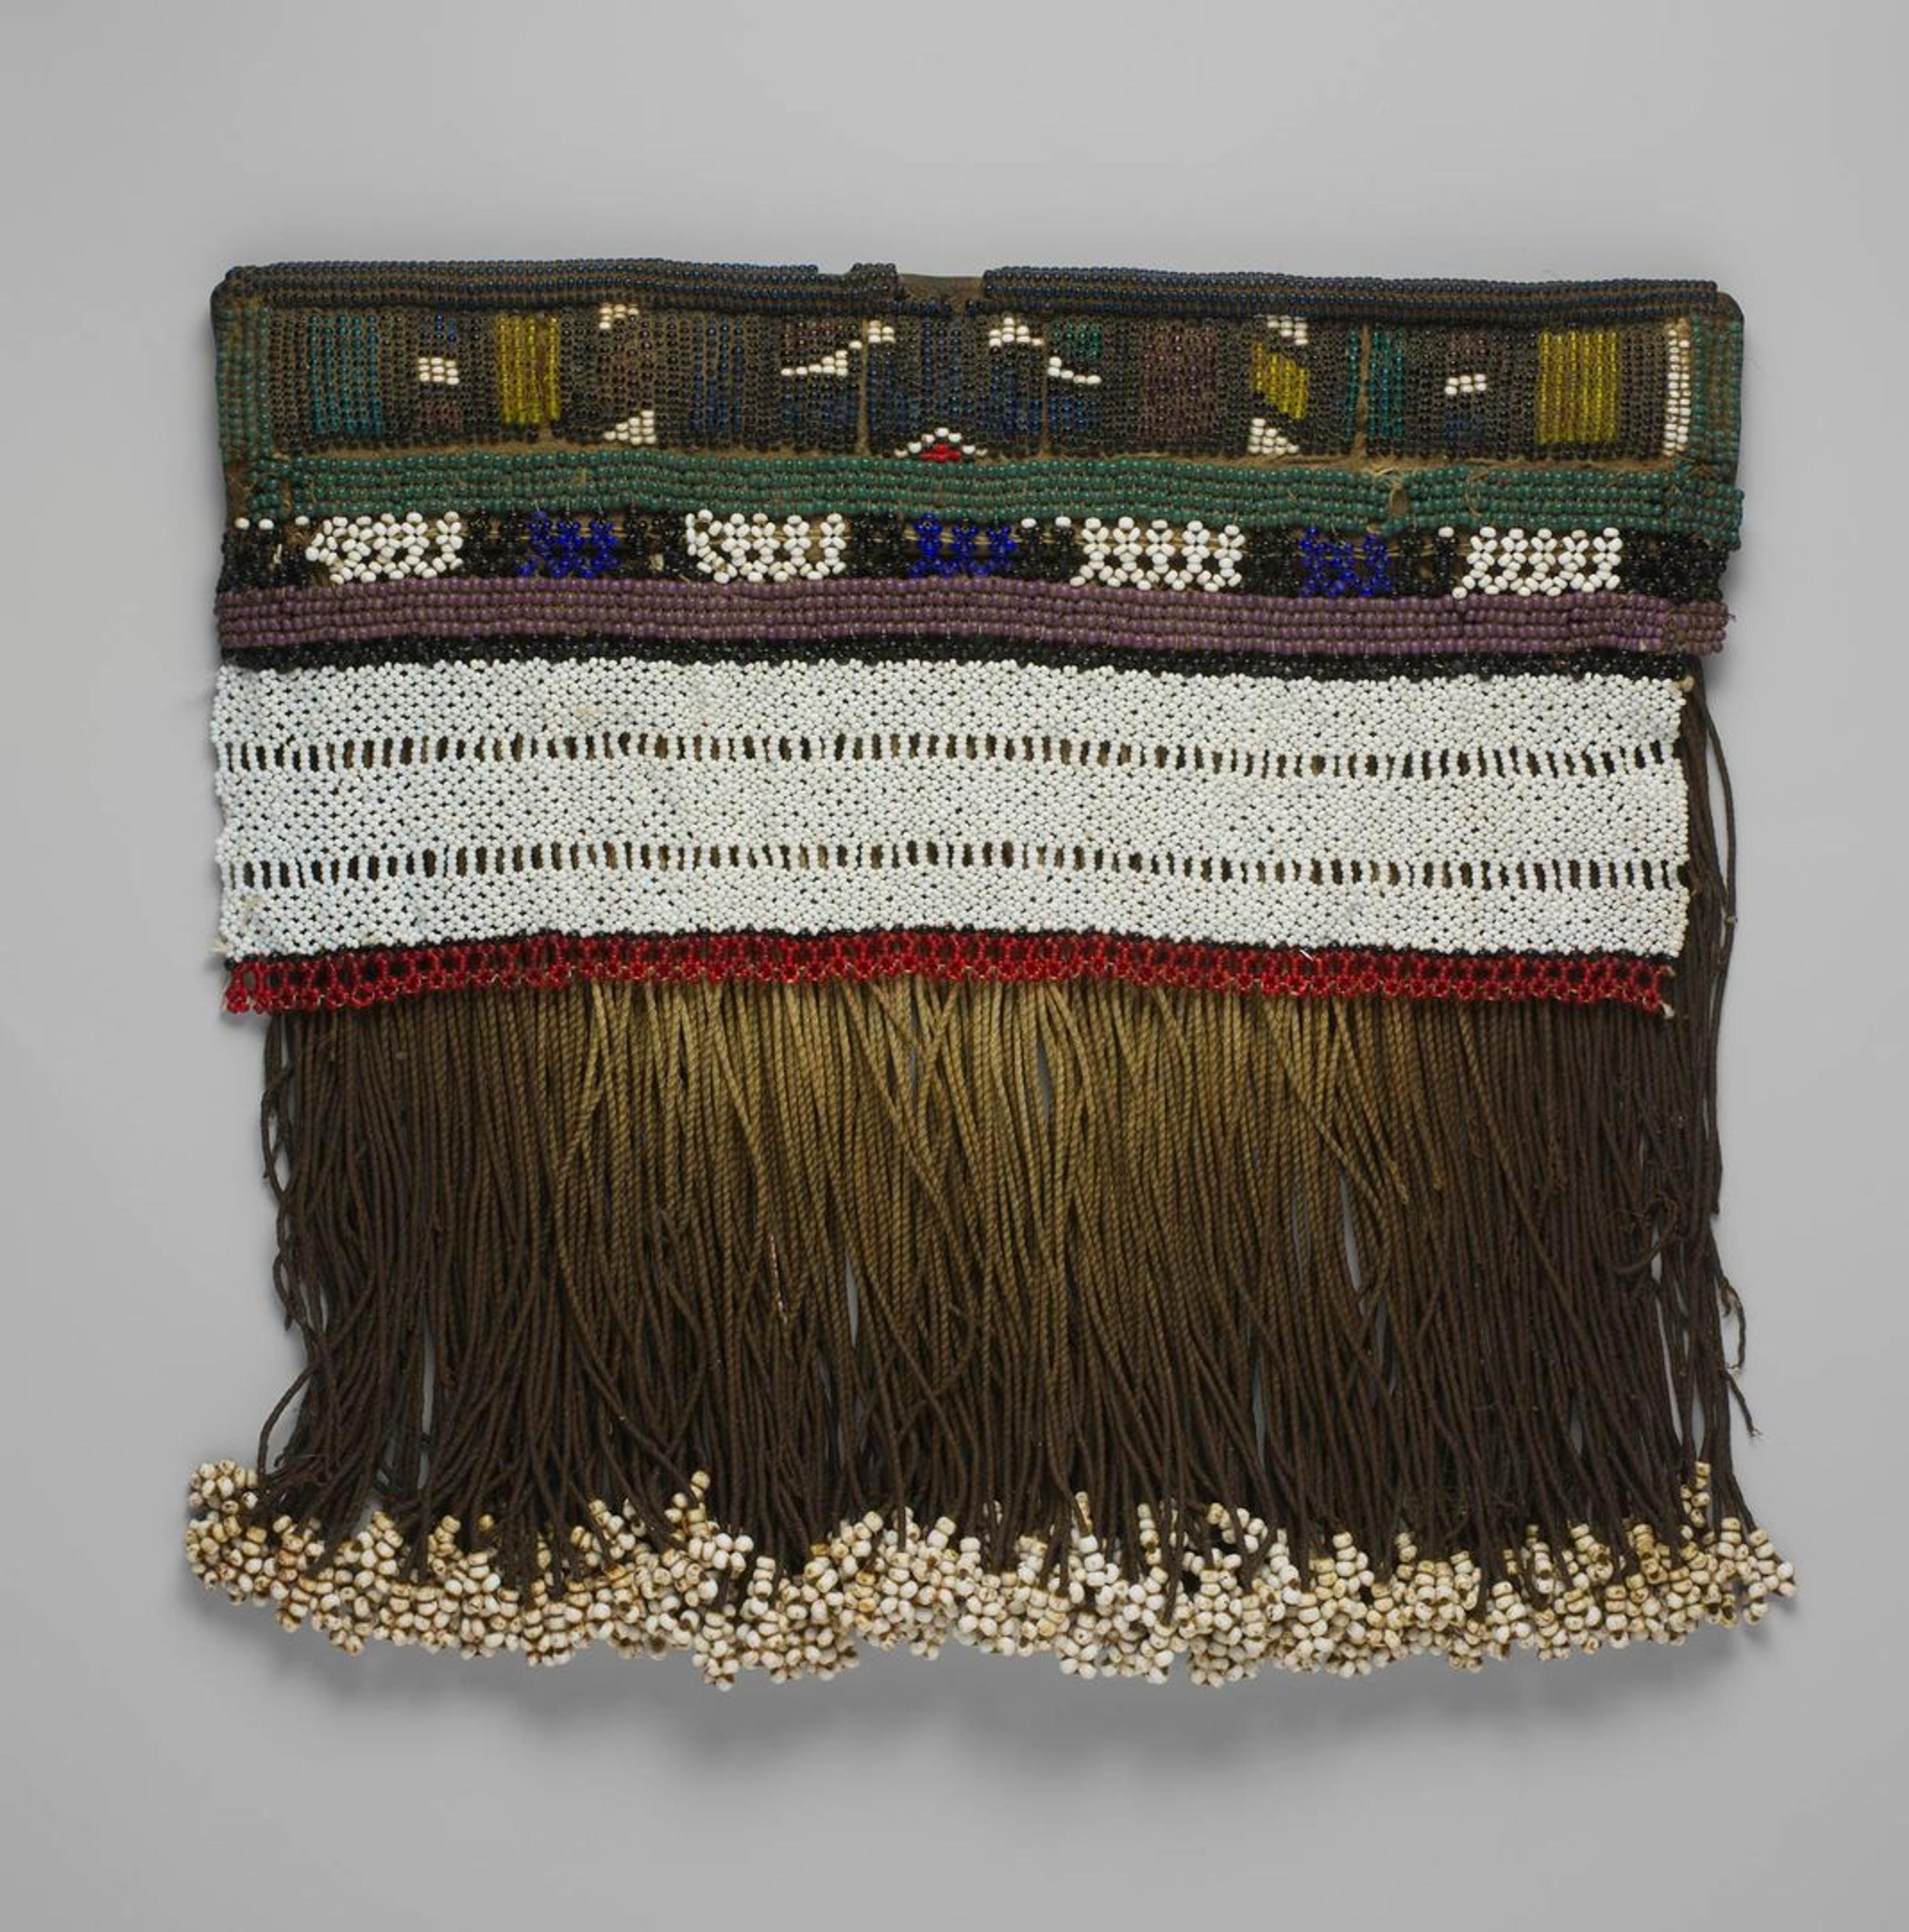 Beadwork in the Arts of Africa and Beyond - The Metropolitan Museum of Art